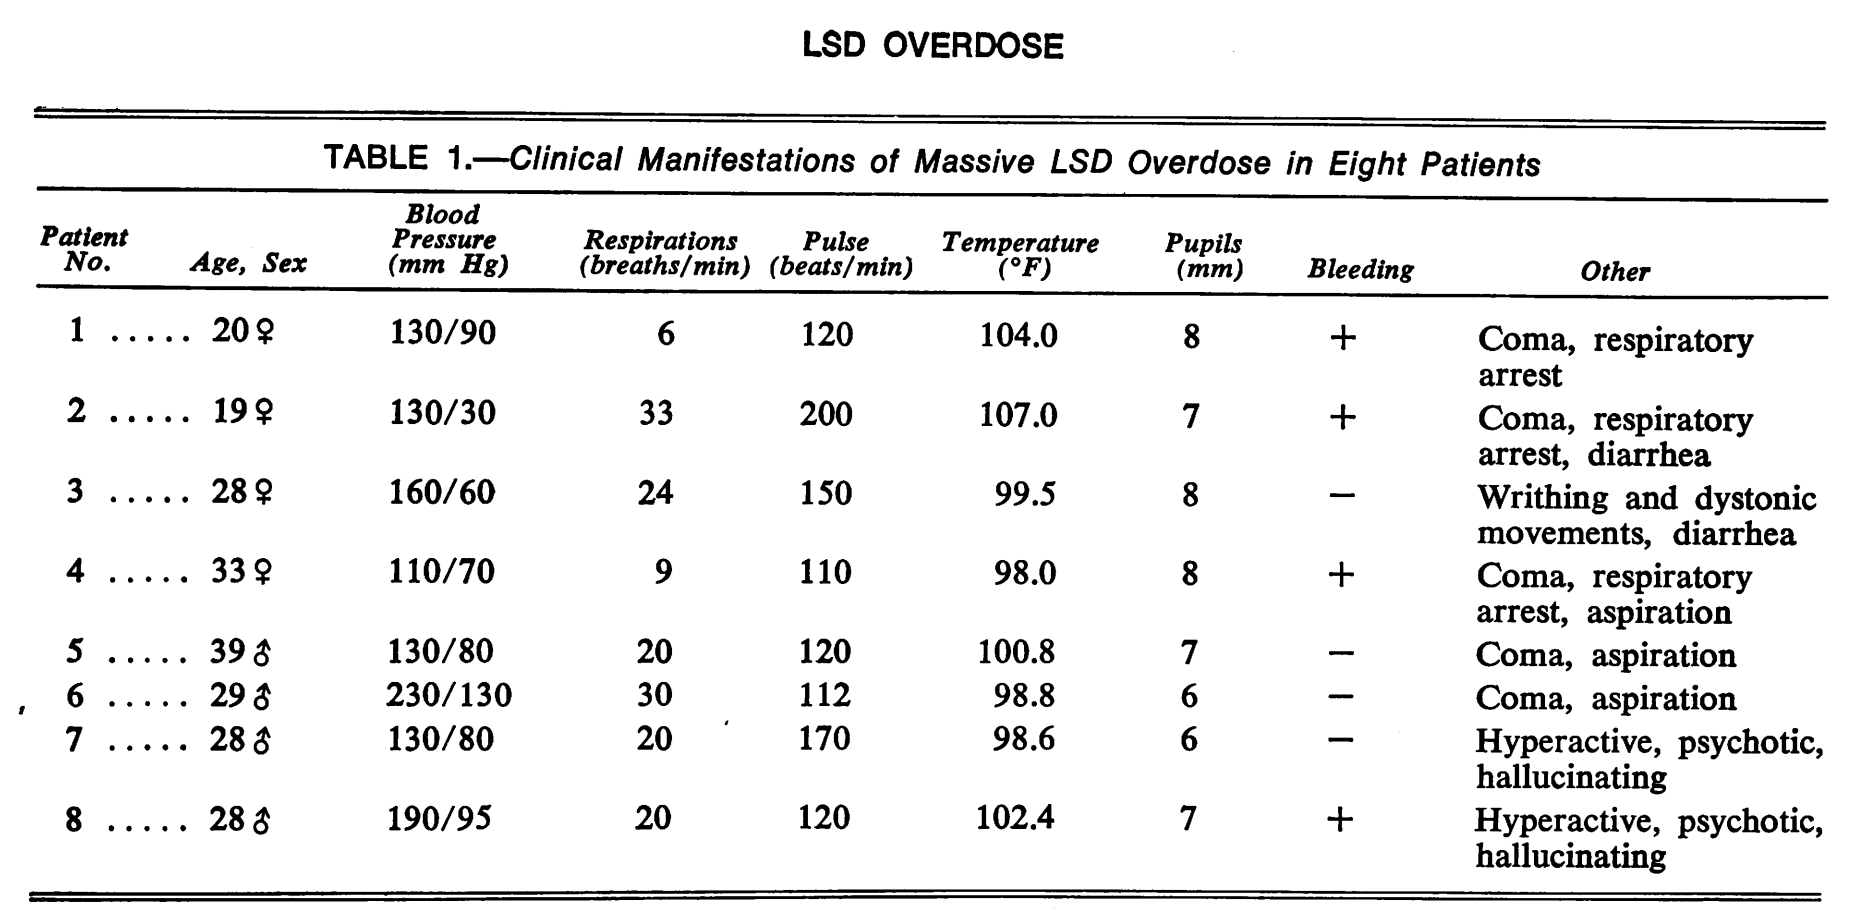 Vitals from all 8 individuals (ranging in age from 19 to 39 years old) after overdosing on LSD.